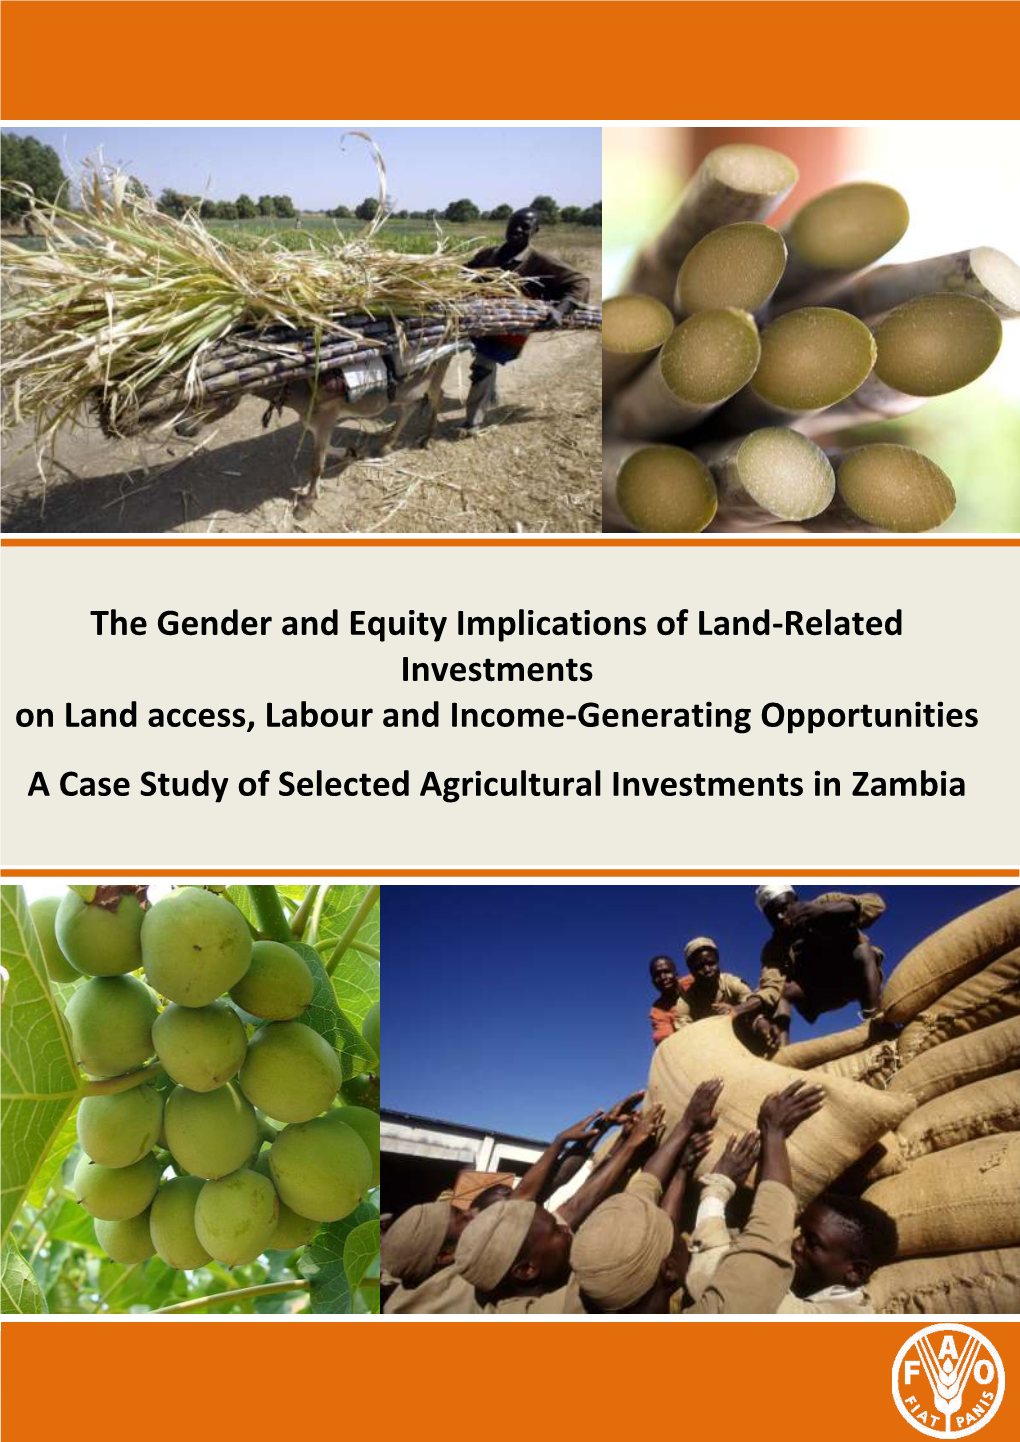 The Gender and Equity Implications of Land-Related Investments on Land Access, Labour and Income-Generating Opportunities